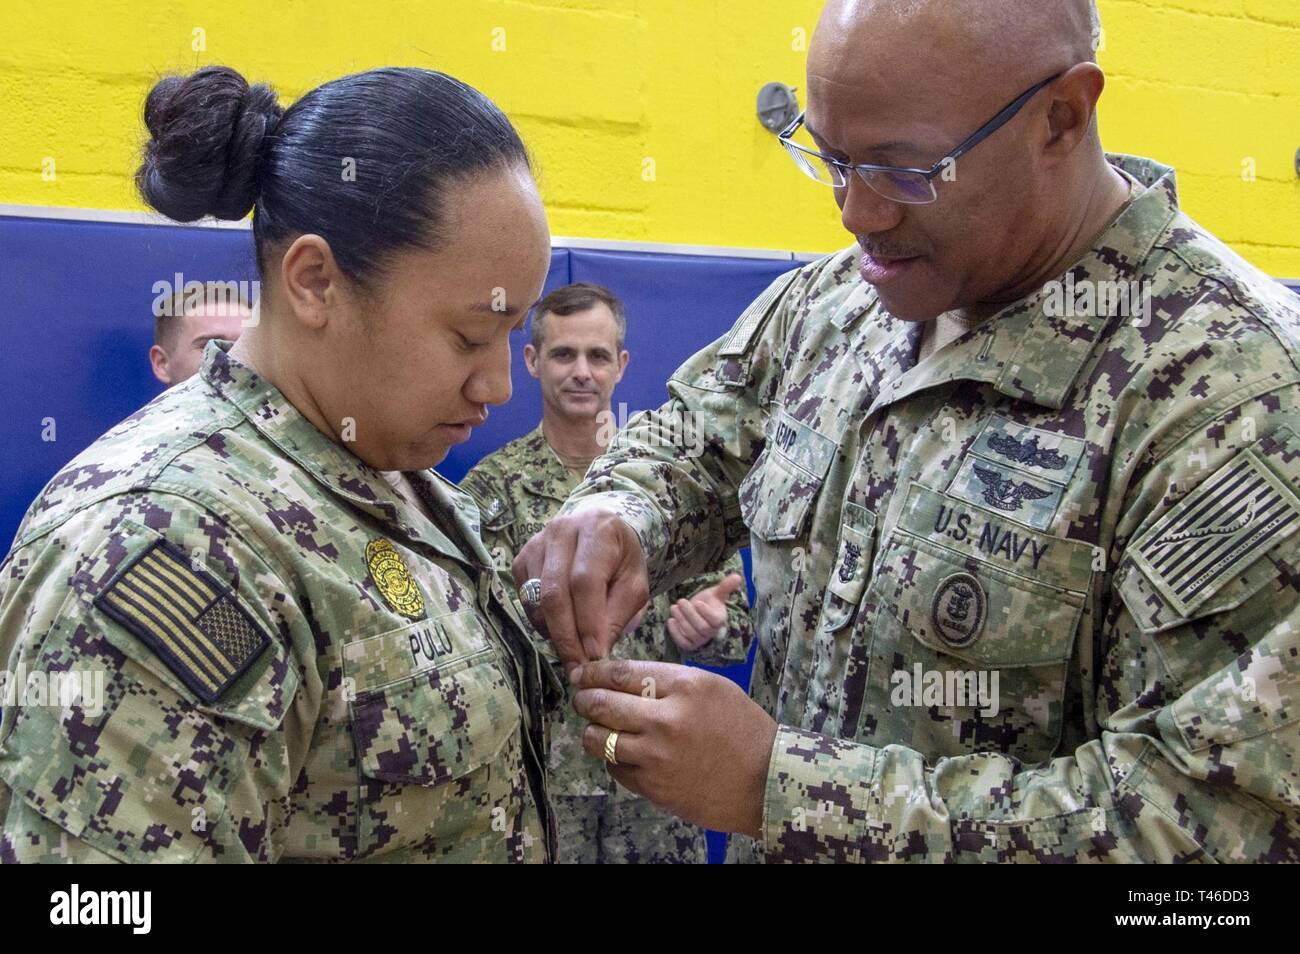 NAVAL SUPPORT ACTIVITY SOUDA BAY, Greece (March 11, 2019) U.S. Naval Forces Europe-Africa Fleet Master Chief Raymond D. Kemp promotes Master-at-Arms 3rd Class Angelina Pulu to Petty Officer 2nd Class during an awards ceremony onboard Naval Support Activity (NSA) Souda Bay, March 11, 2019. NSA Souda Bay is an operational ashore base that enables U.S., allied, and partner nation forces to be where they are needed and when they are needed to ensure security and stability in Europe, Africa, and Southwest Asia. Stock Photo